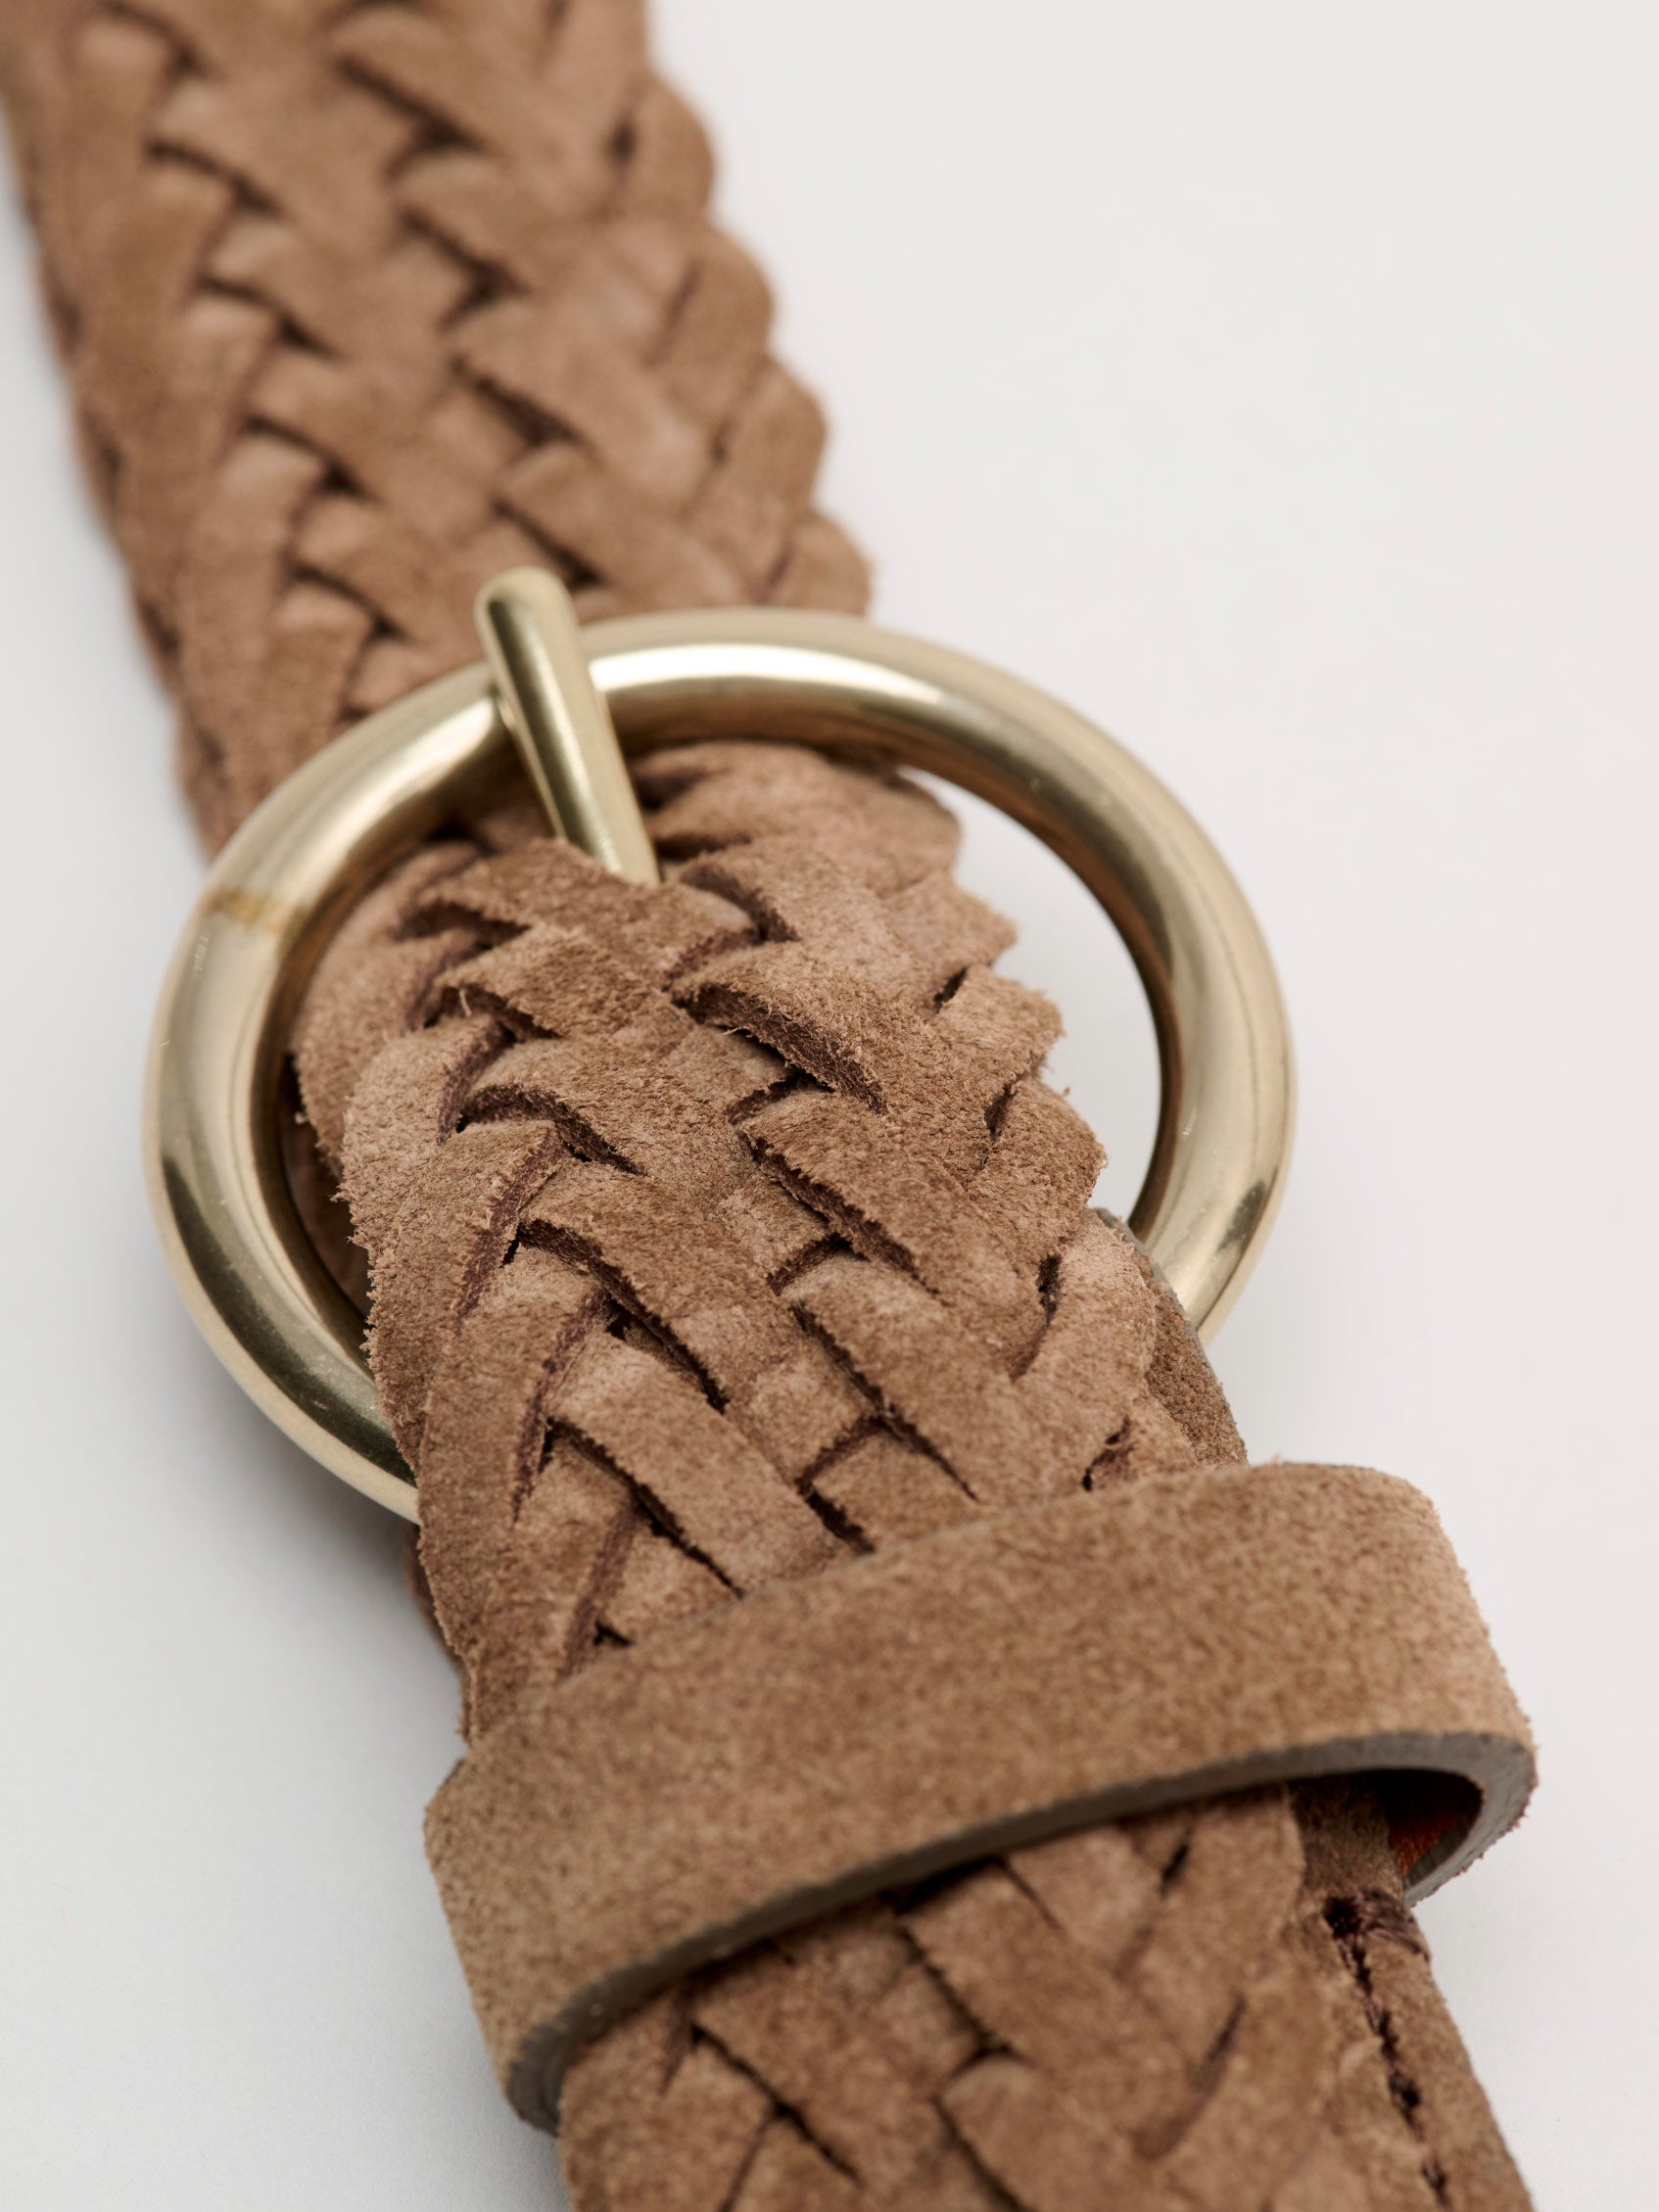 Norse Store  Shipping Worldwide - Anderson's Braided Leather Belt - Brown